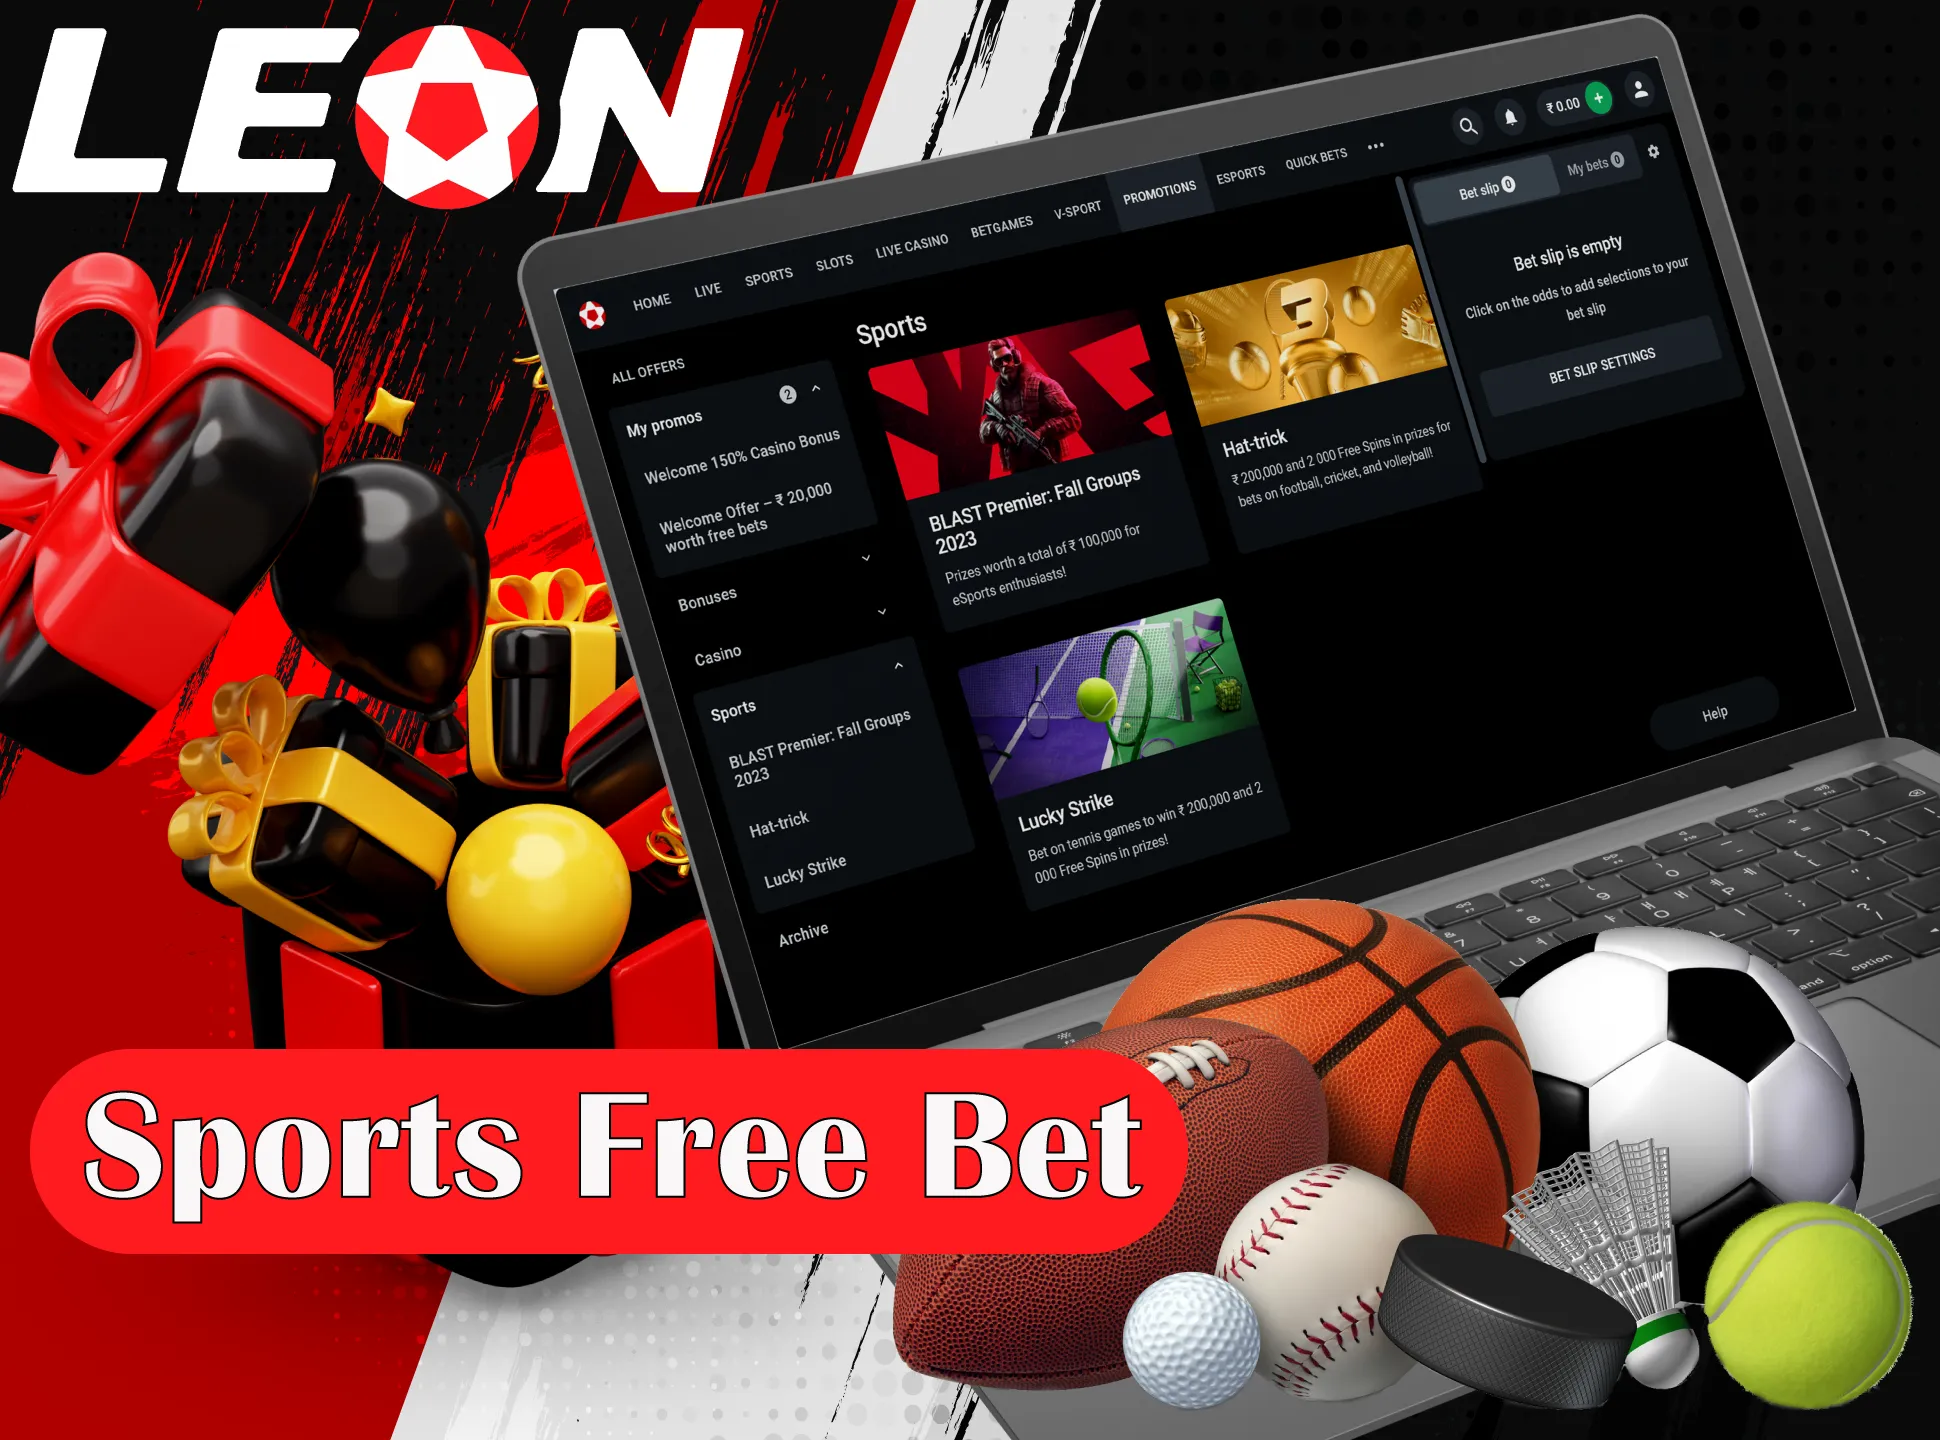 Leonbet also offers a weekly free bet for its regular players.